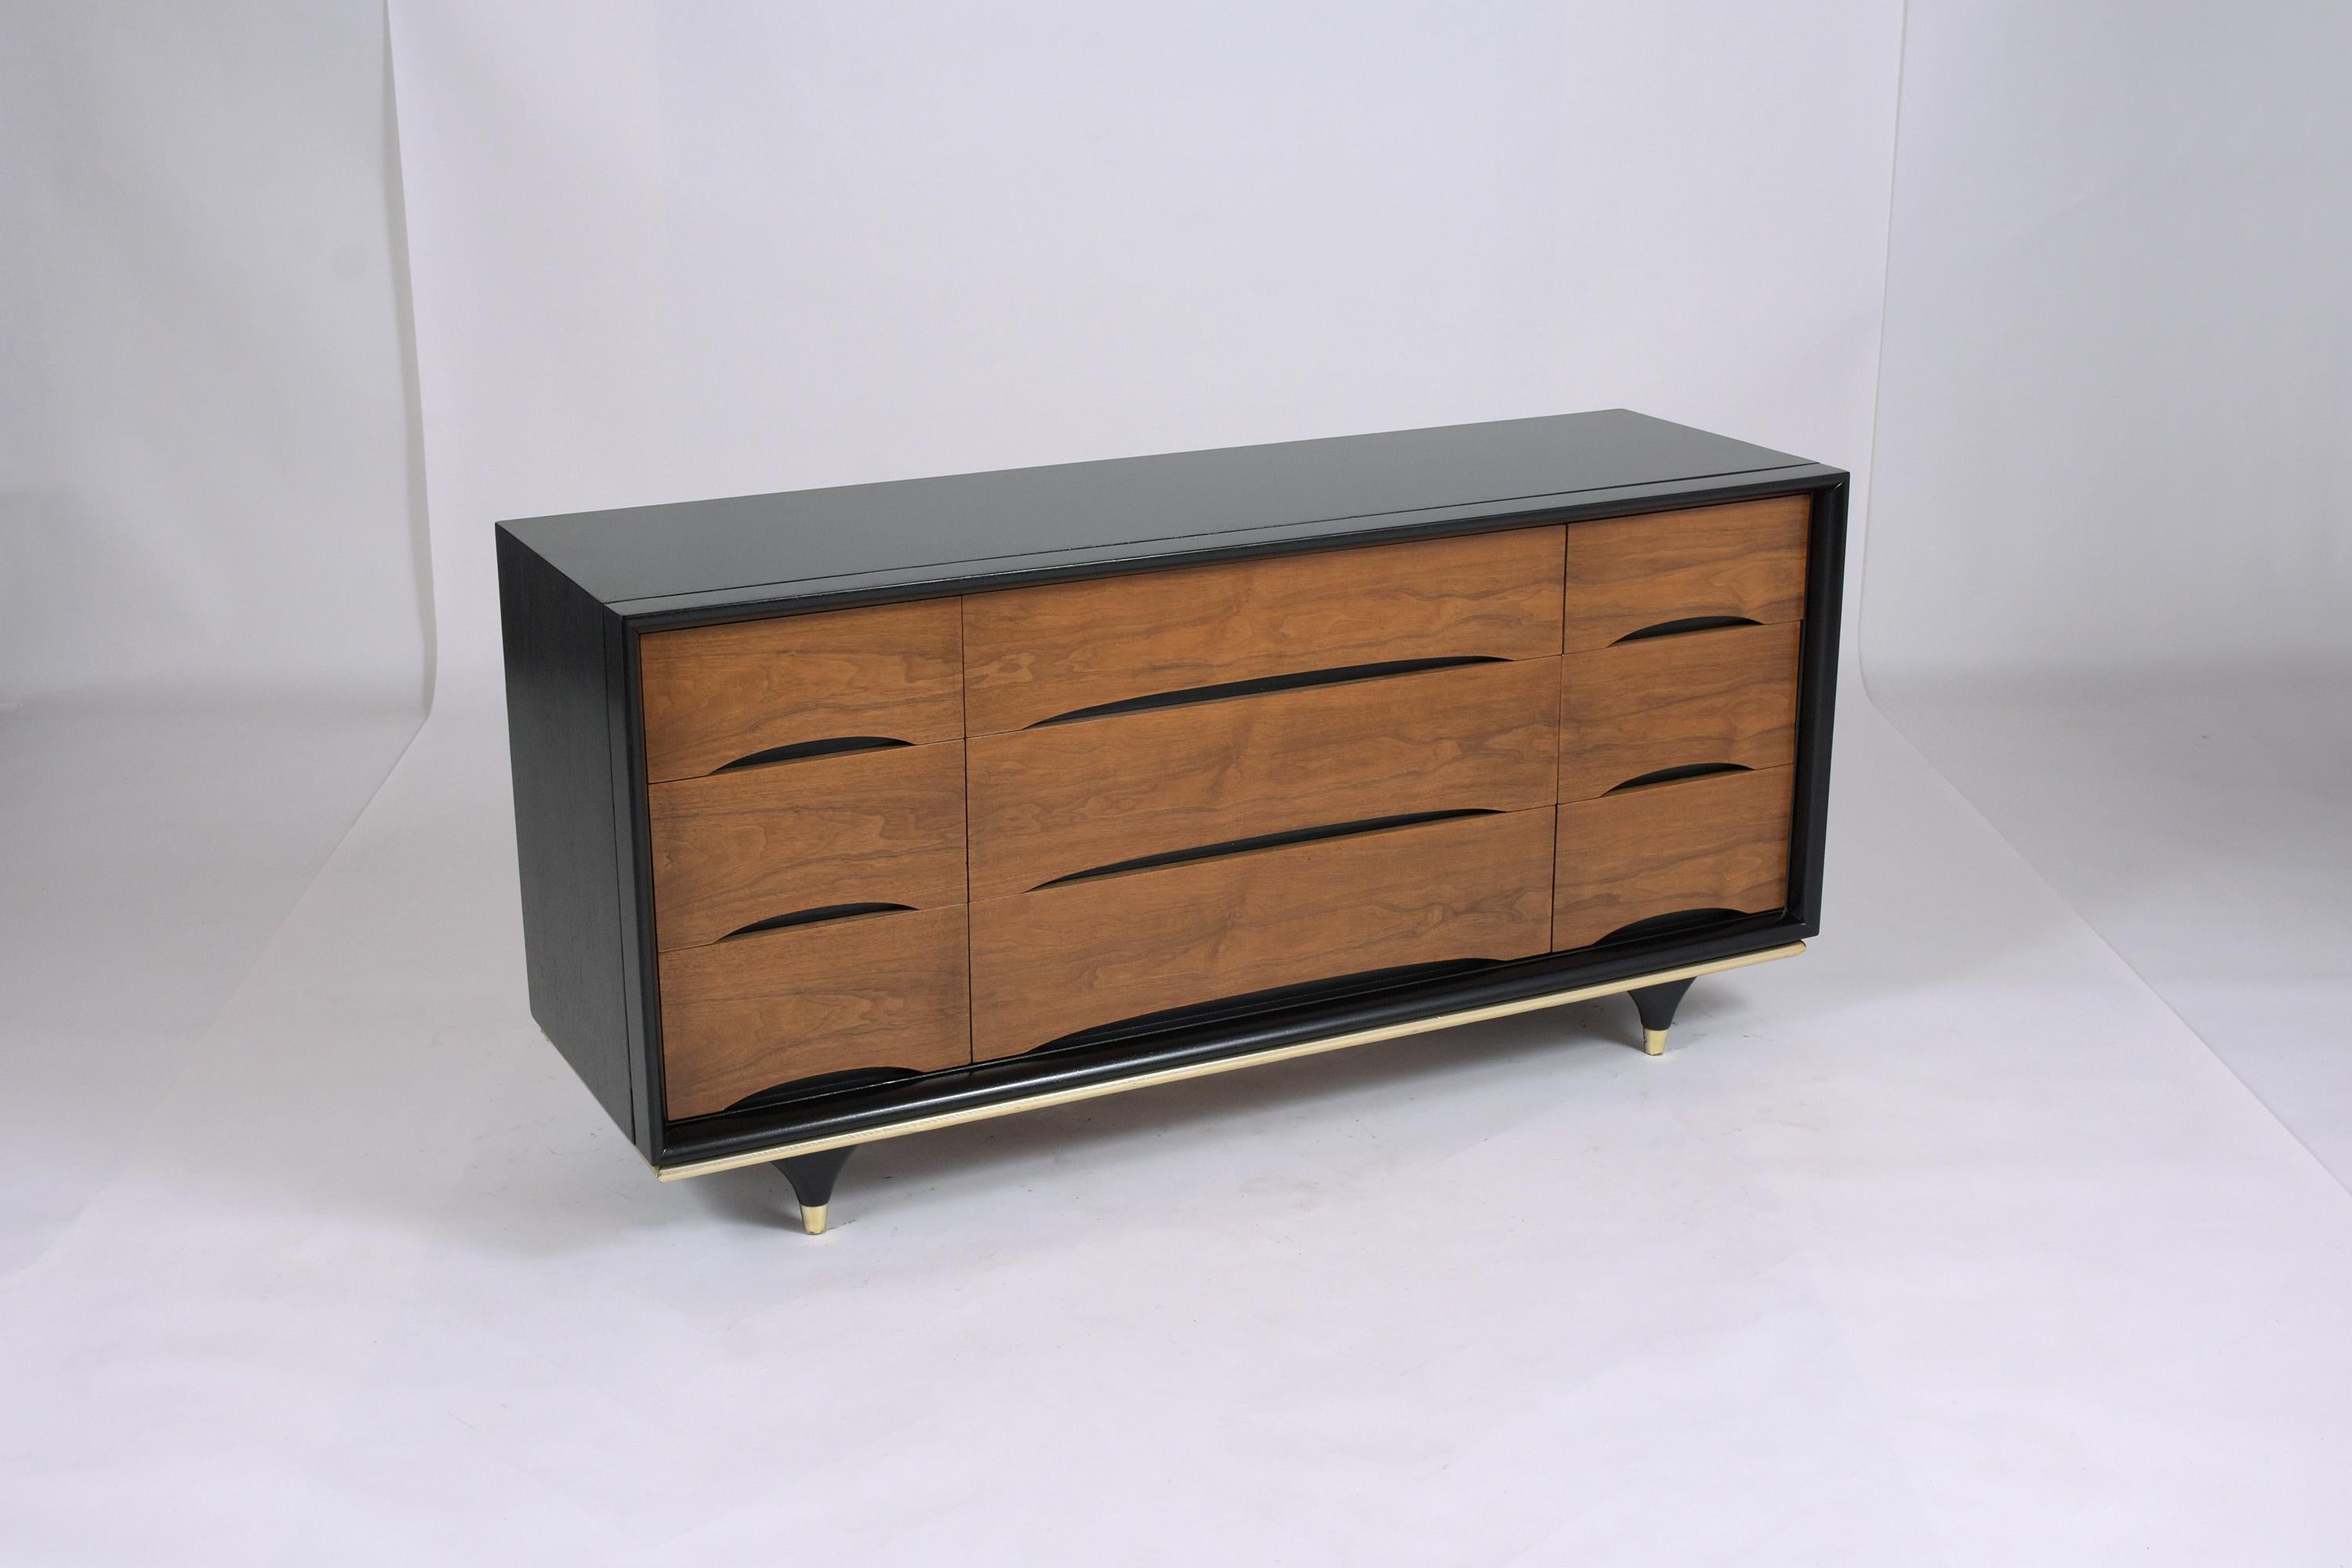 Lacquer Vintage Walnut Chest of Drawers: Mid-Century Elegance with Brass Accents